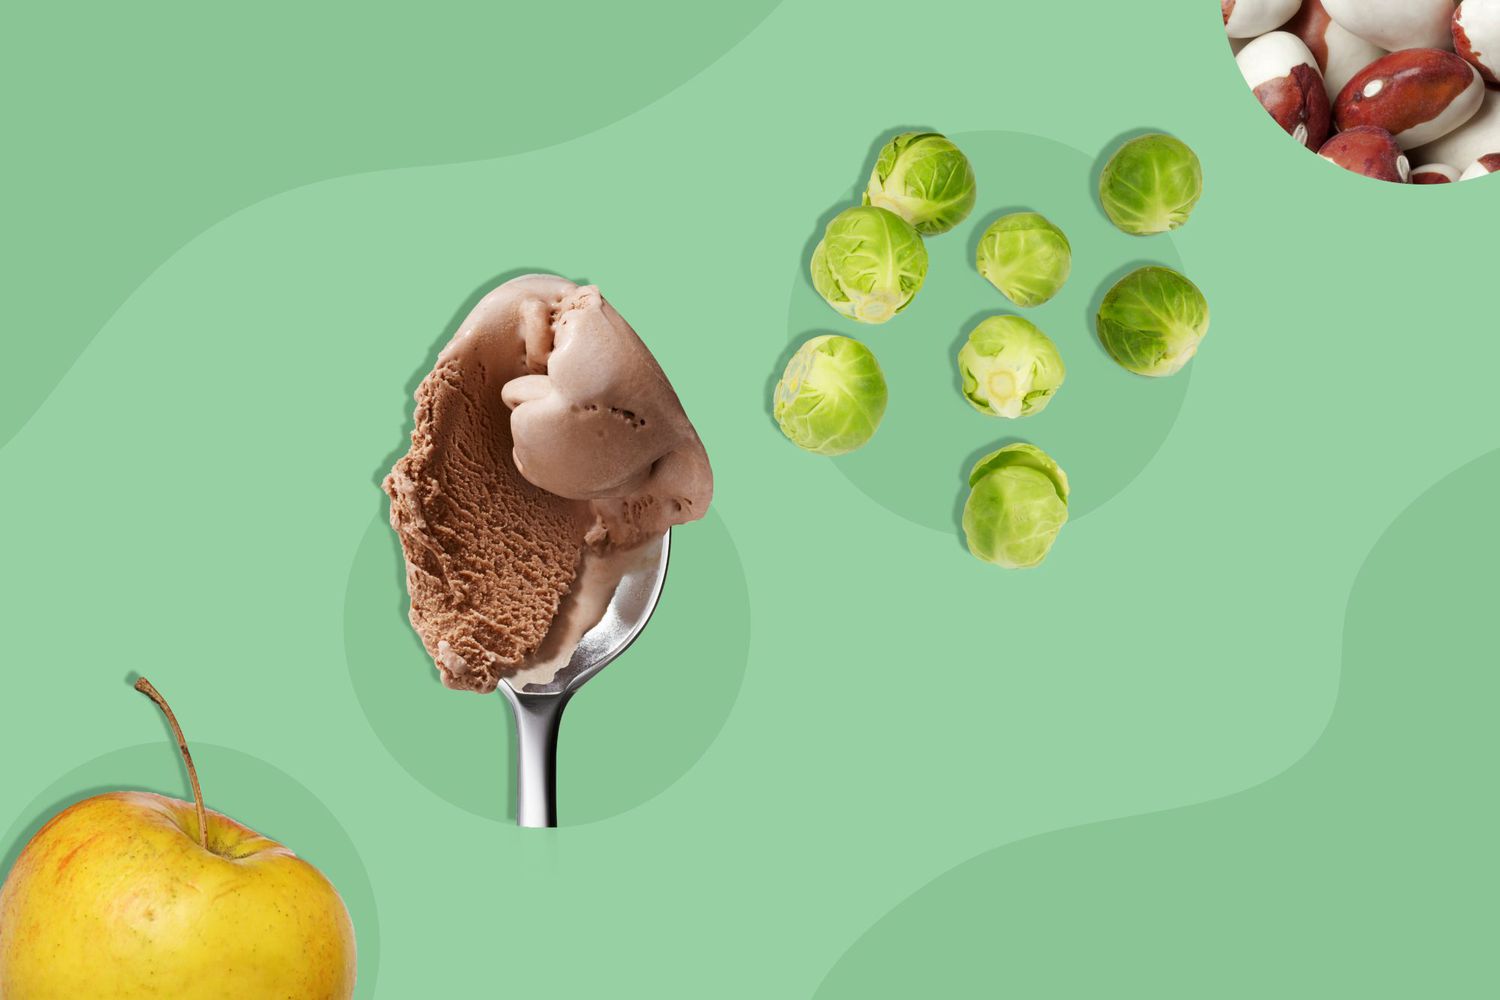 Images of apple, ice cream, brussel sprouts, and beans against a green background